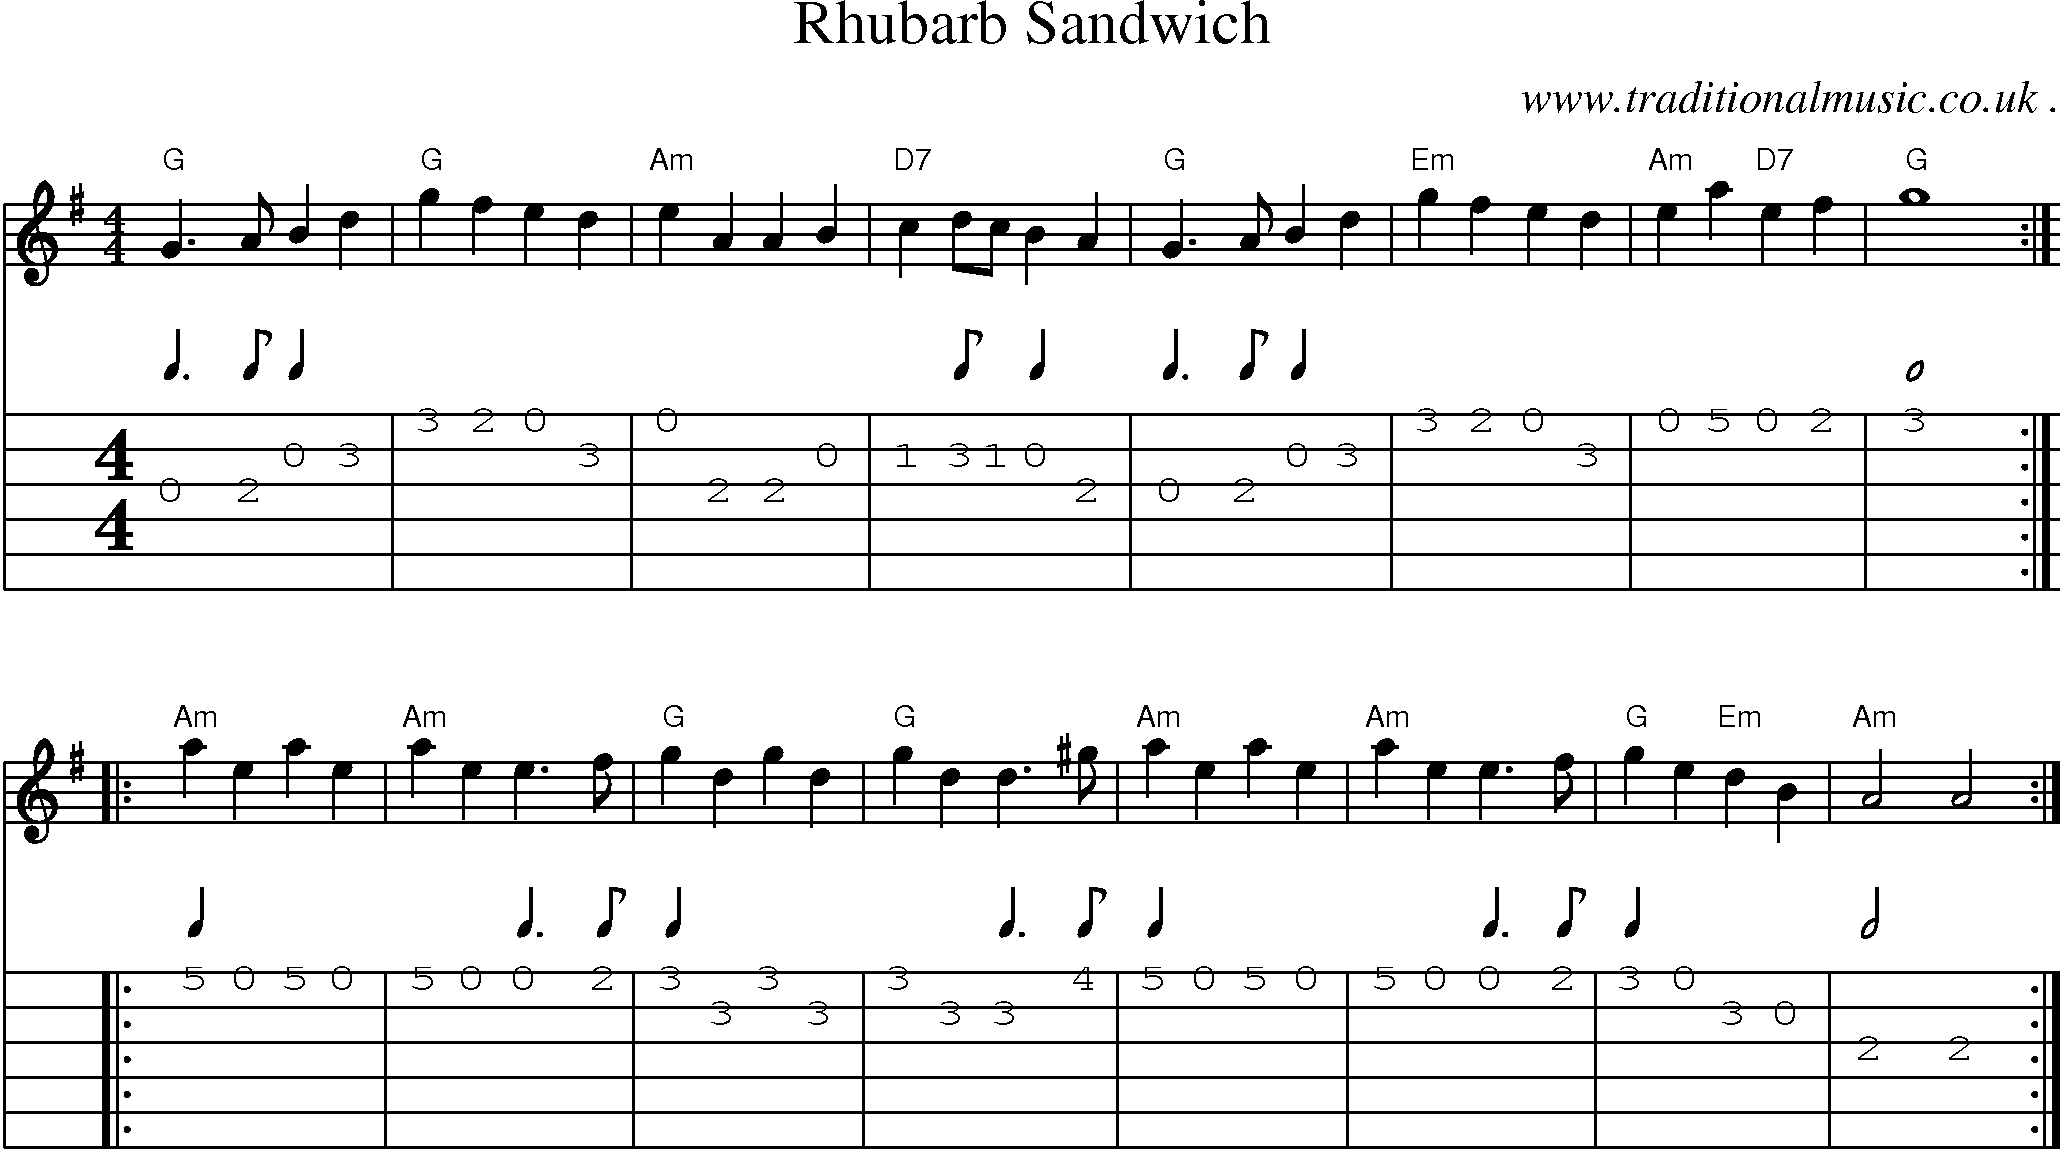 Sheet-Music and Guitar Tabs for Rhubarb Sandwich